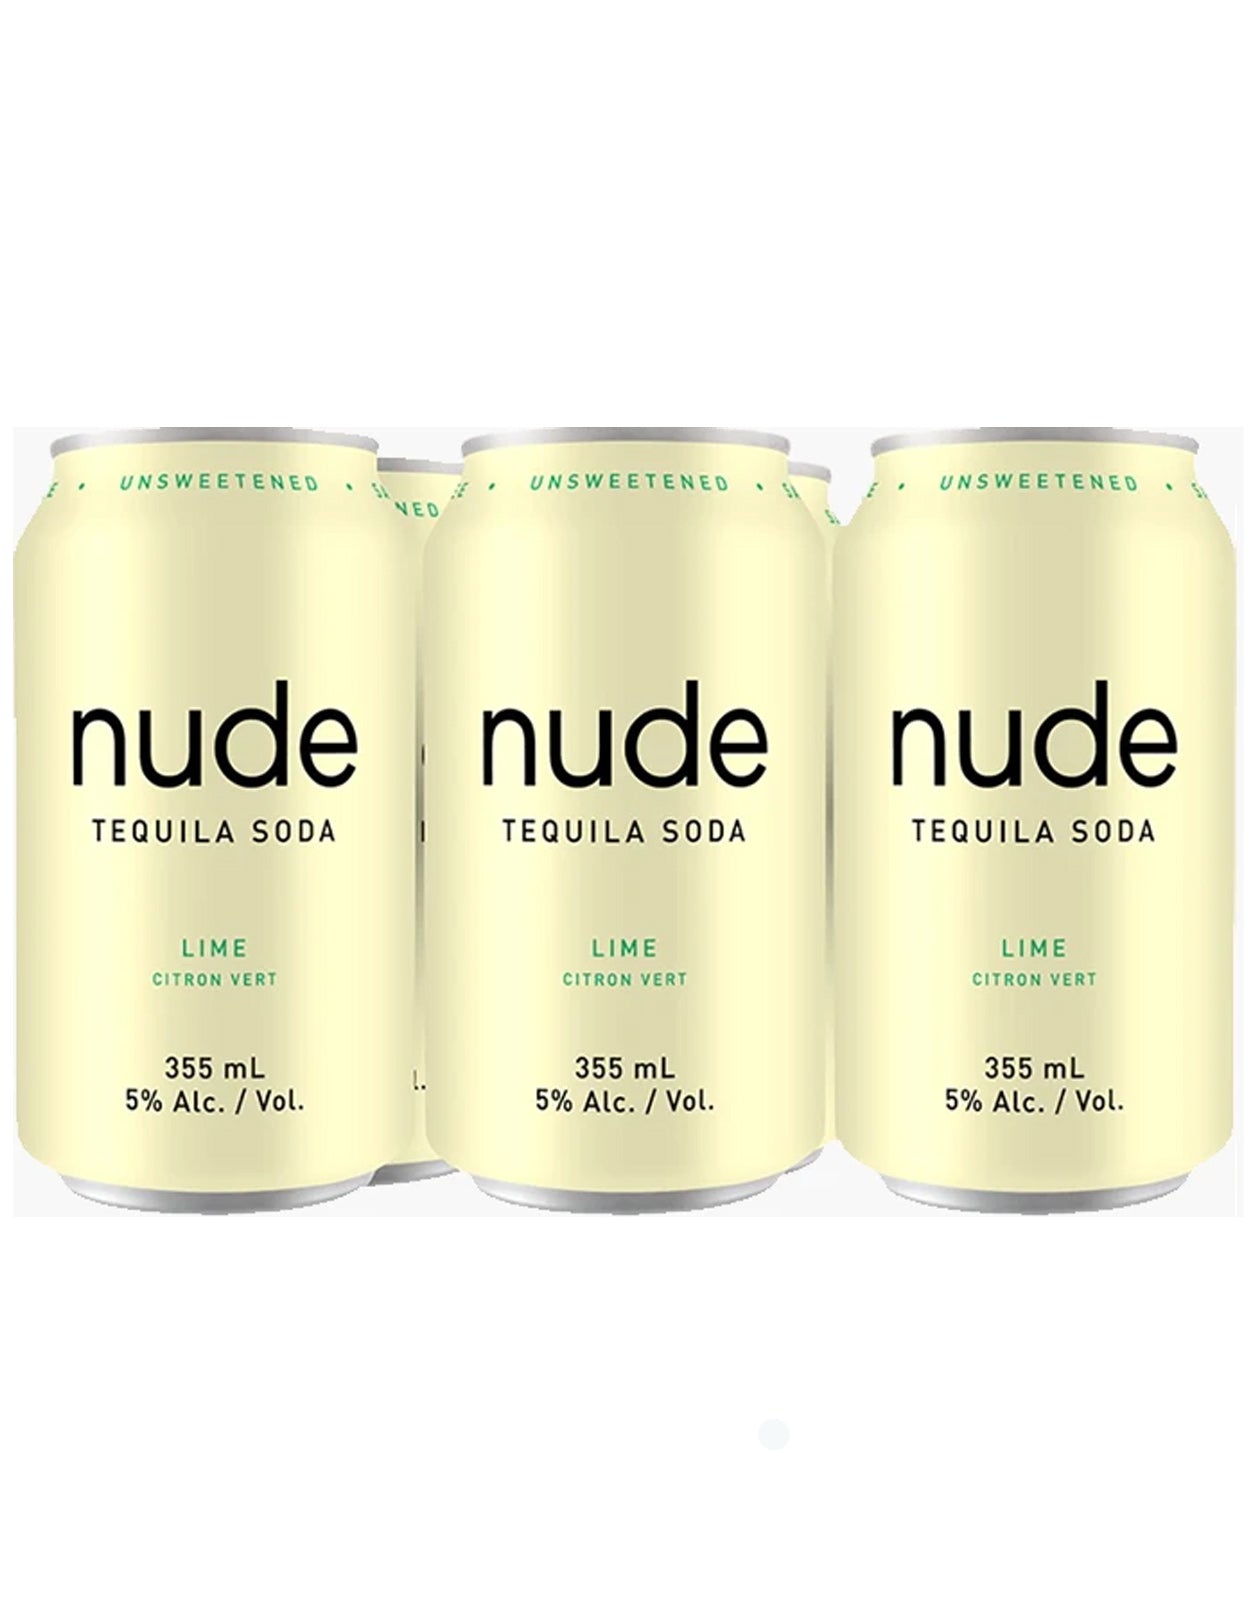 Nude Tequila Soda Lime 355 ml - 6 Cans